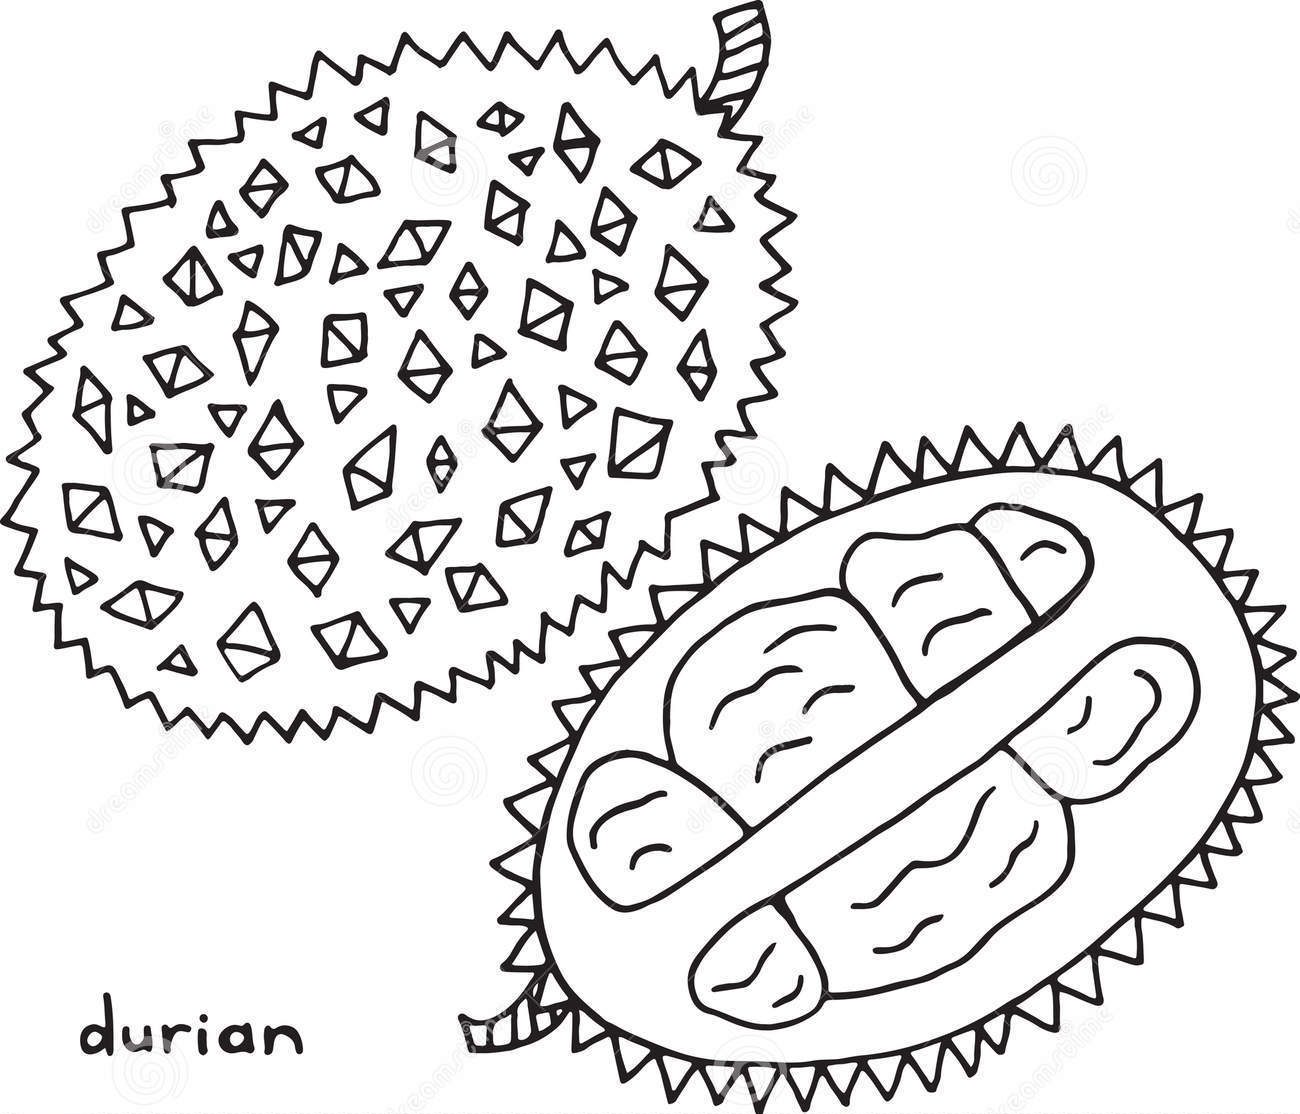 Durian Graphic